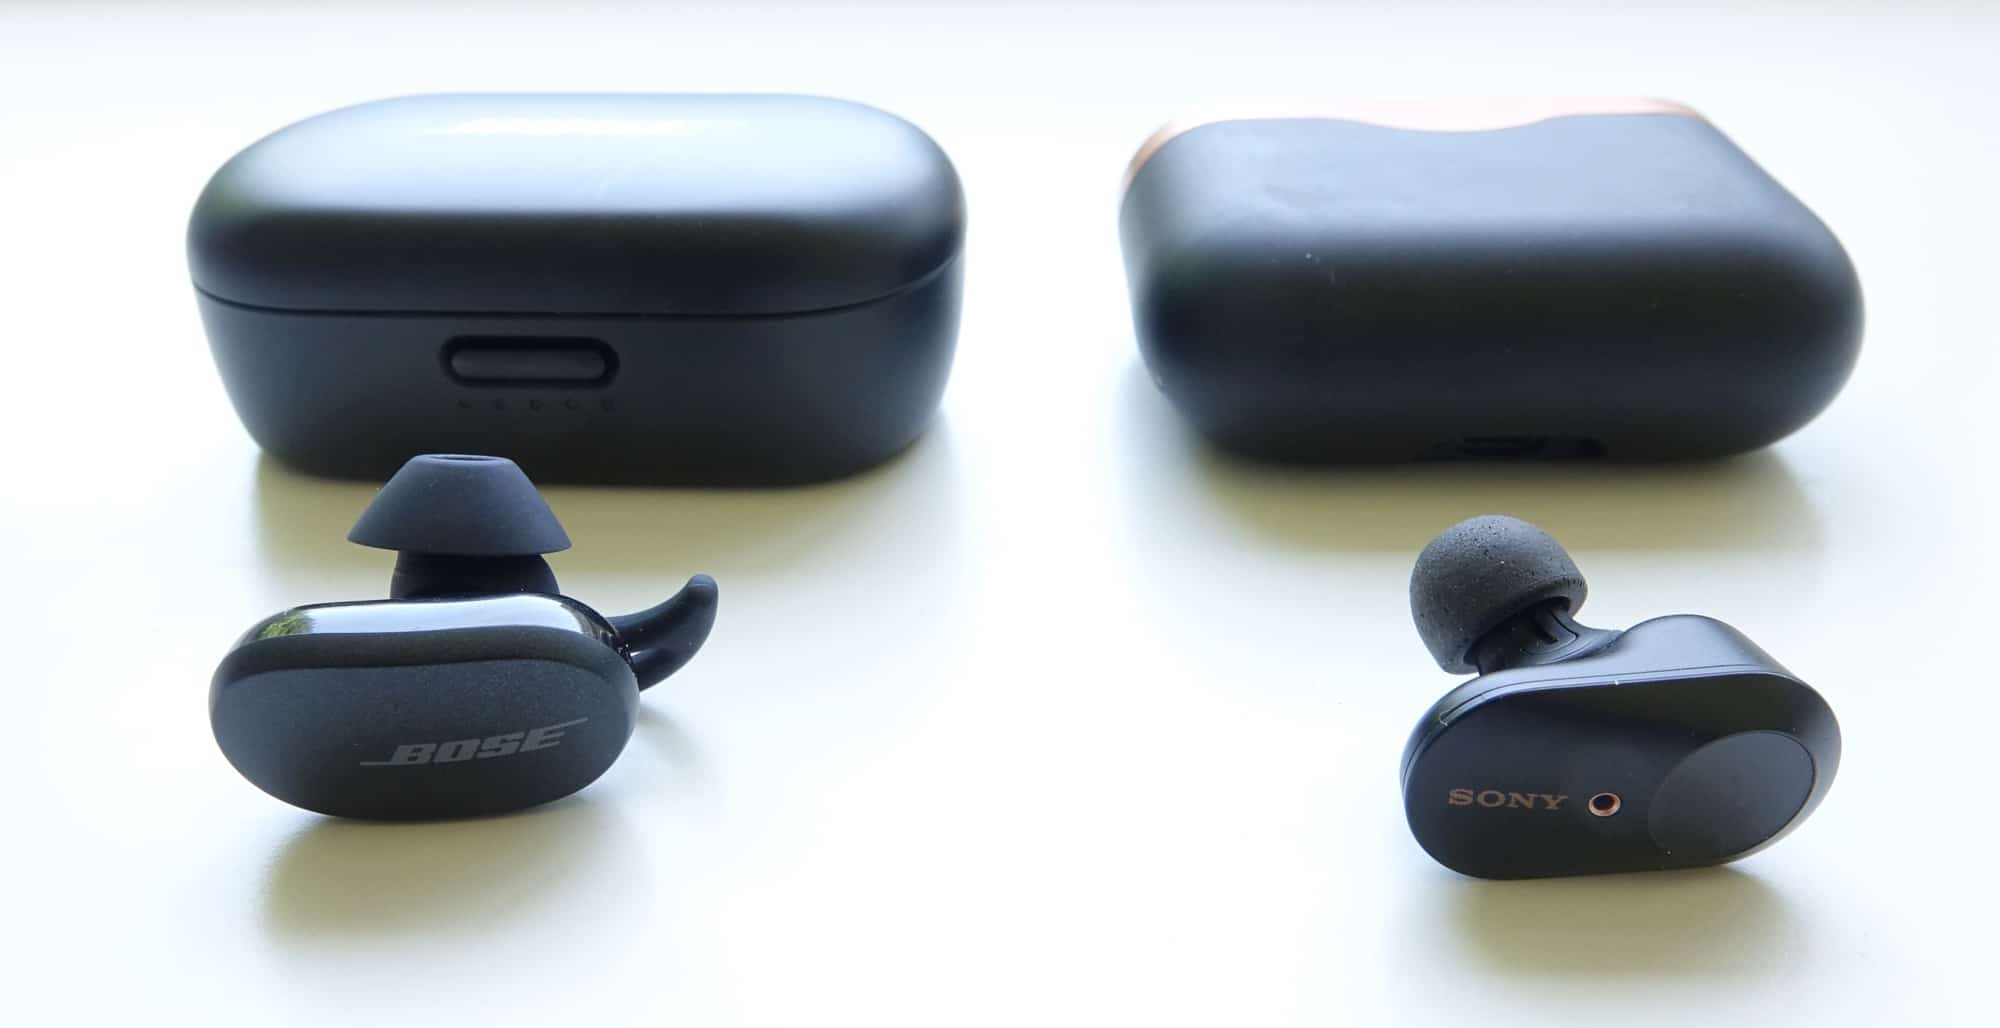 Comparing the Bose QC Earbuds (left) to the Sony WF-1000XM3 (right)